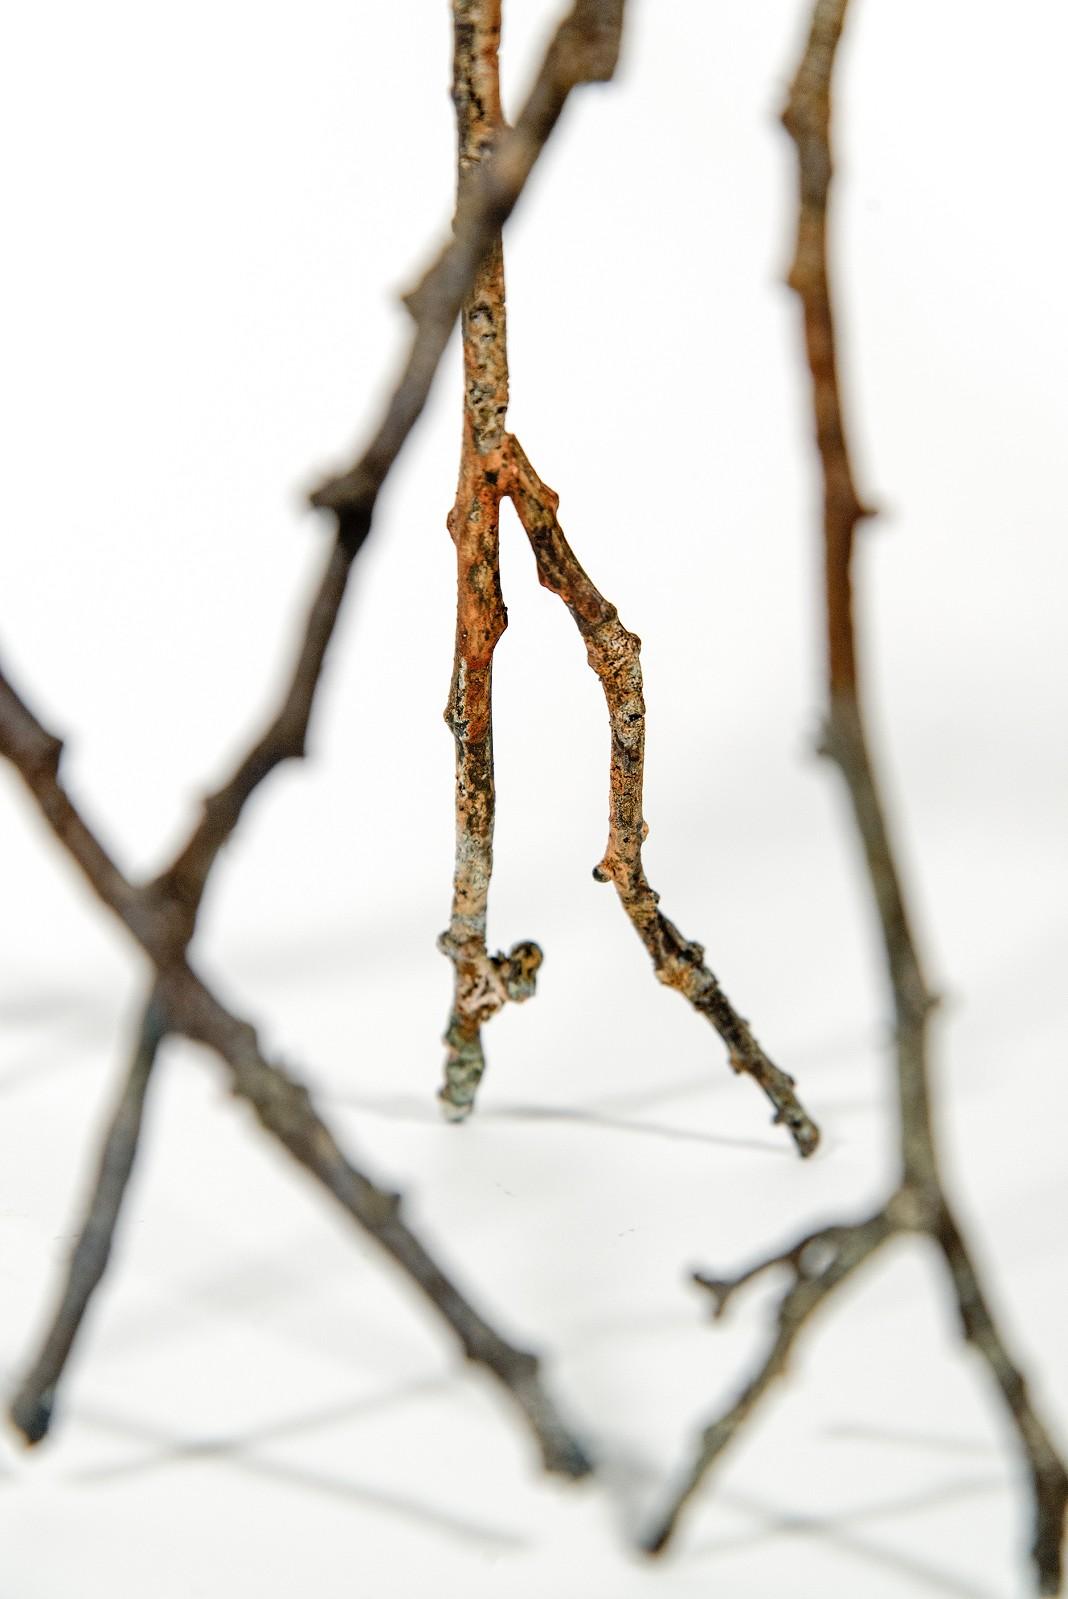 Canadian sculptor P. Roch Smith’s ‘Tree Men’ were inspired by a walk in the woods. Smith noticed that fallen twigs and branches had interesting shapes and he imagined them replacing human limbs. In this bronze piece, two naked male figures face one